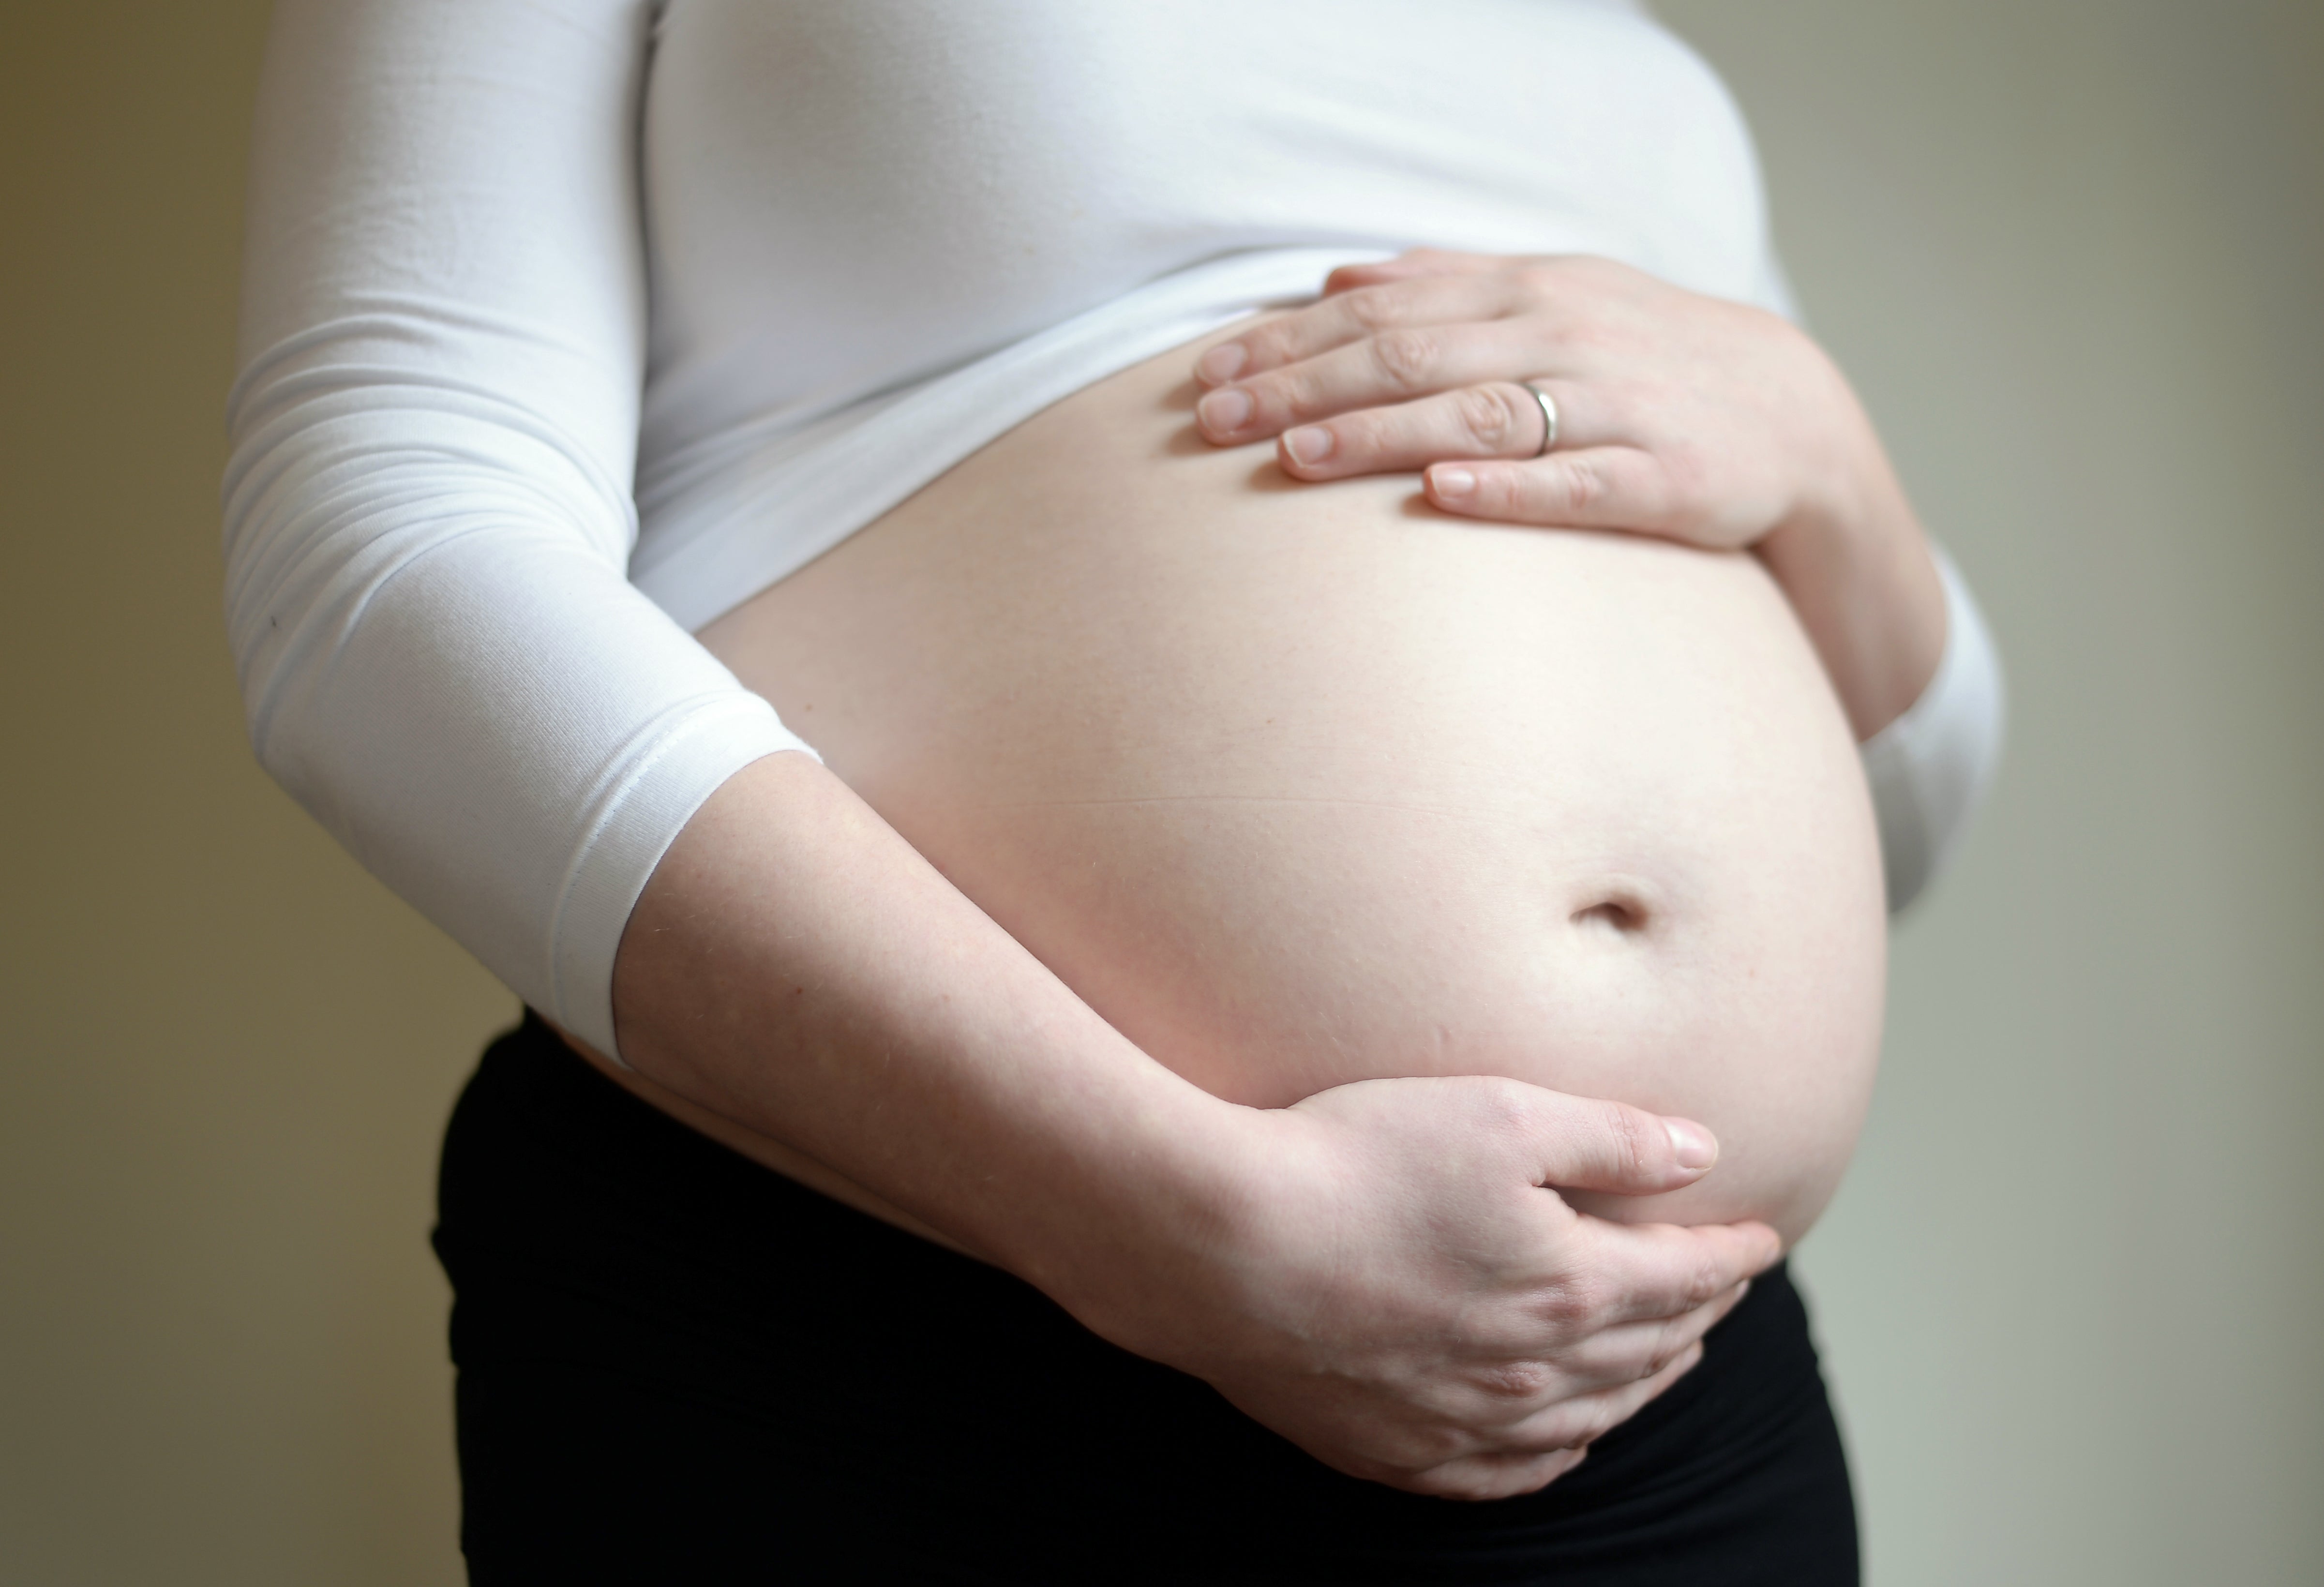 Pregnant women in Britain are not routinely tested for the presence of the bacteria